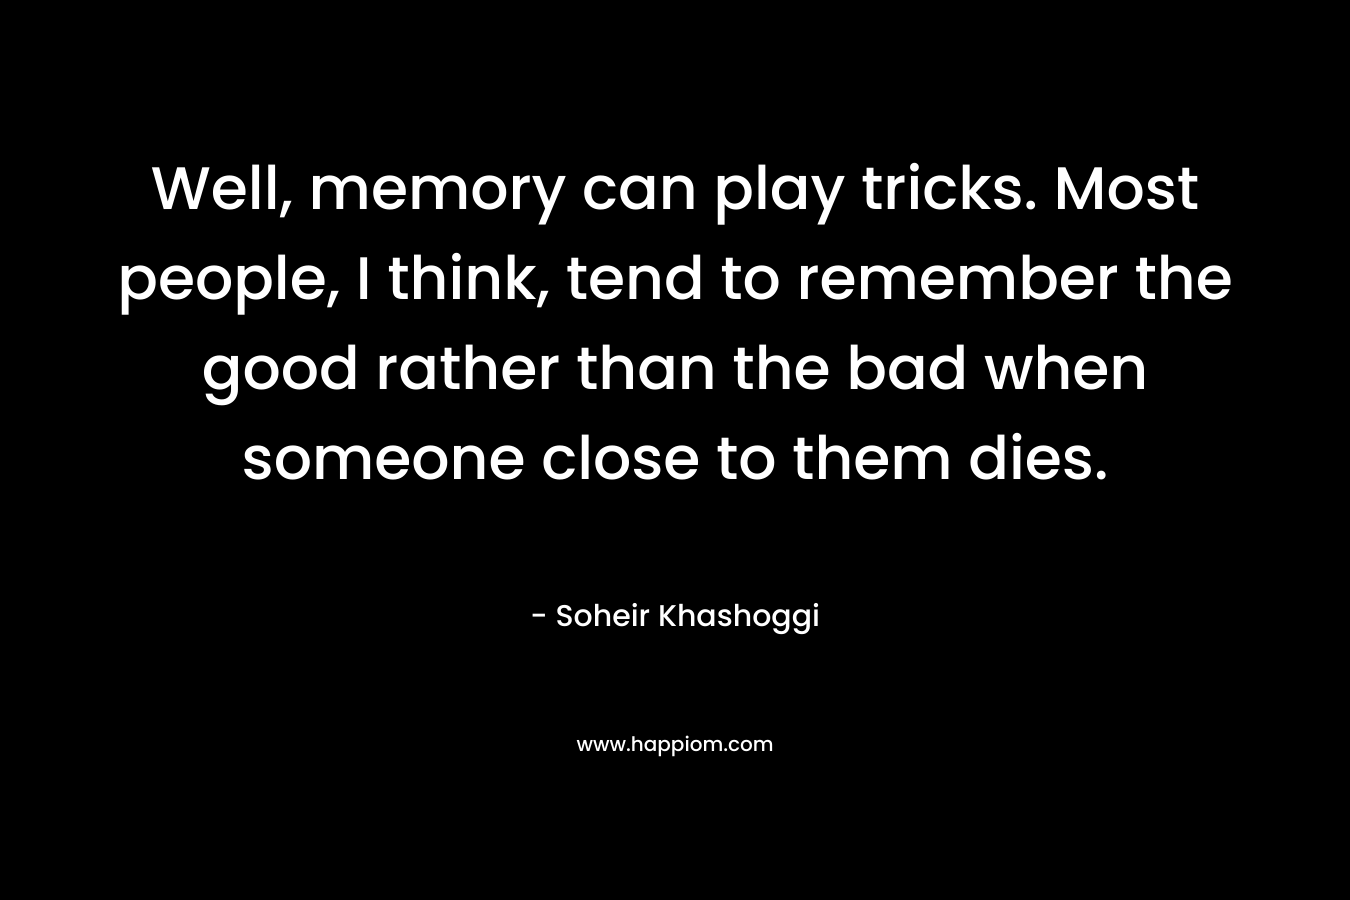 Well, memory can play tricks. Most people, I think, tend to remember the good rather than the bad when someone close to them dies.